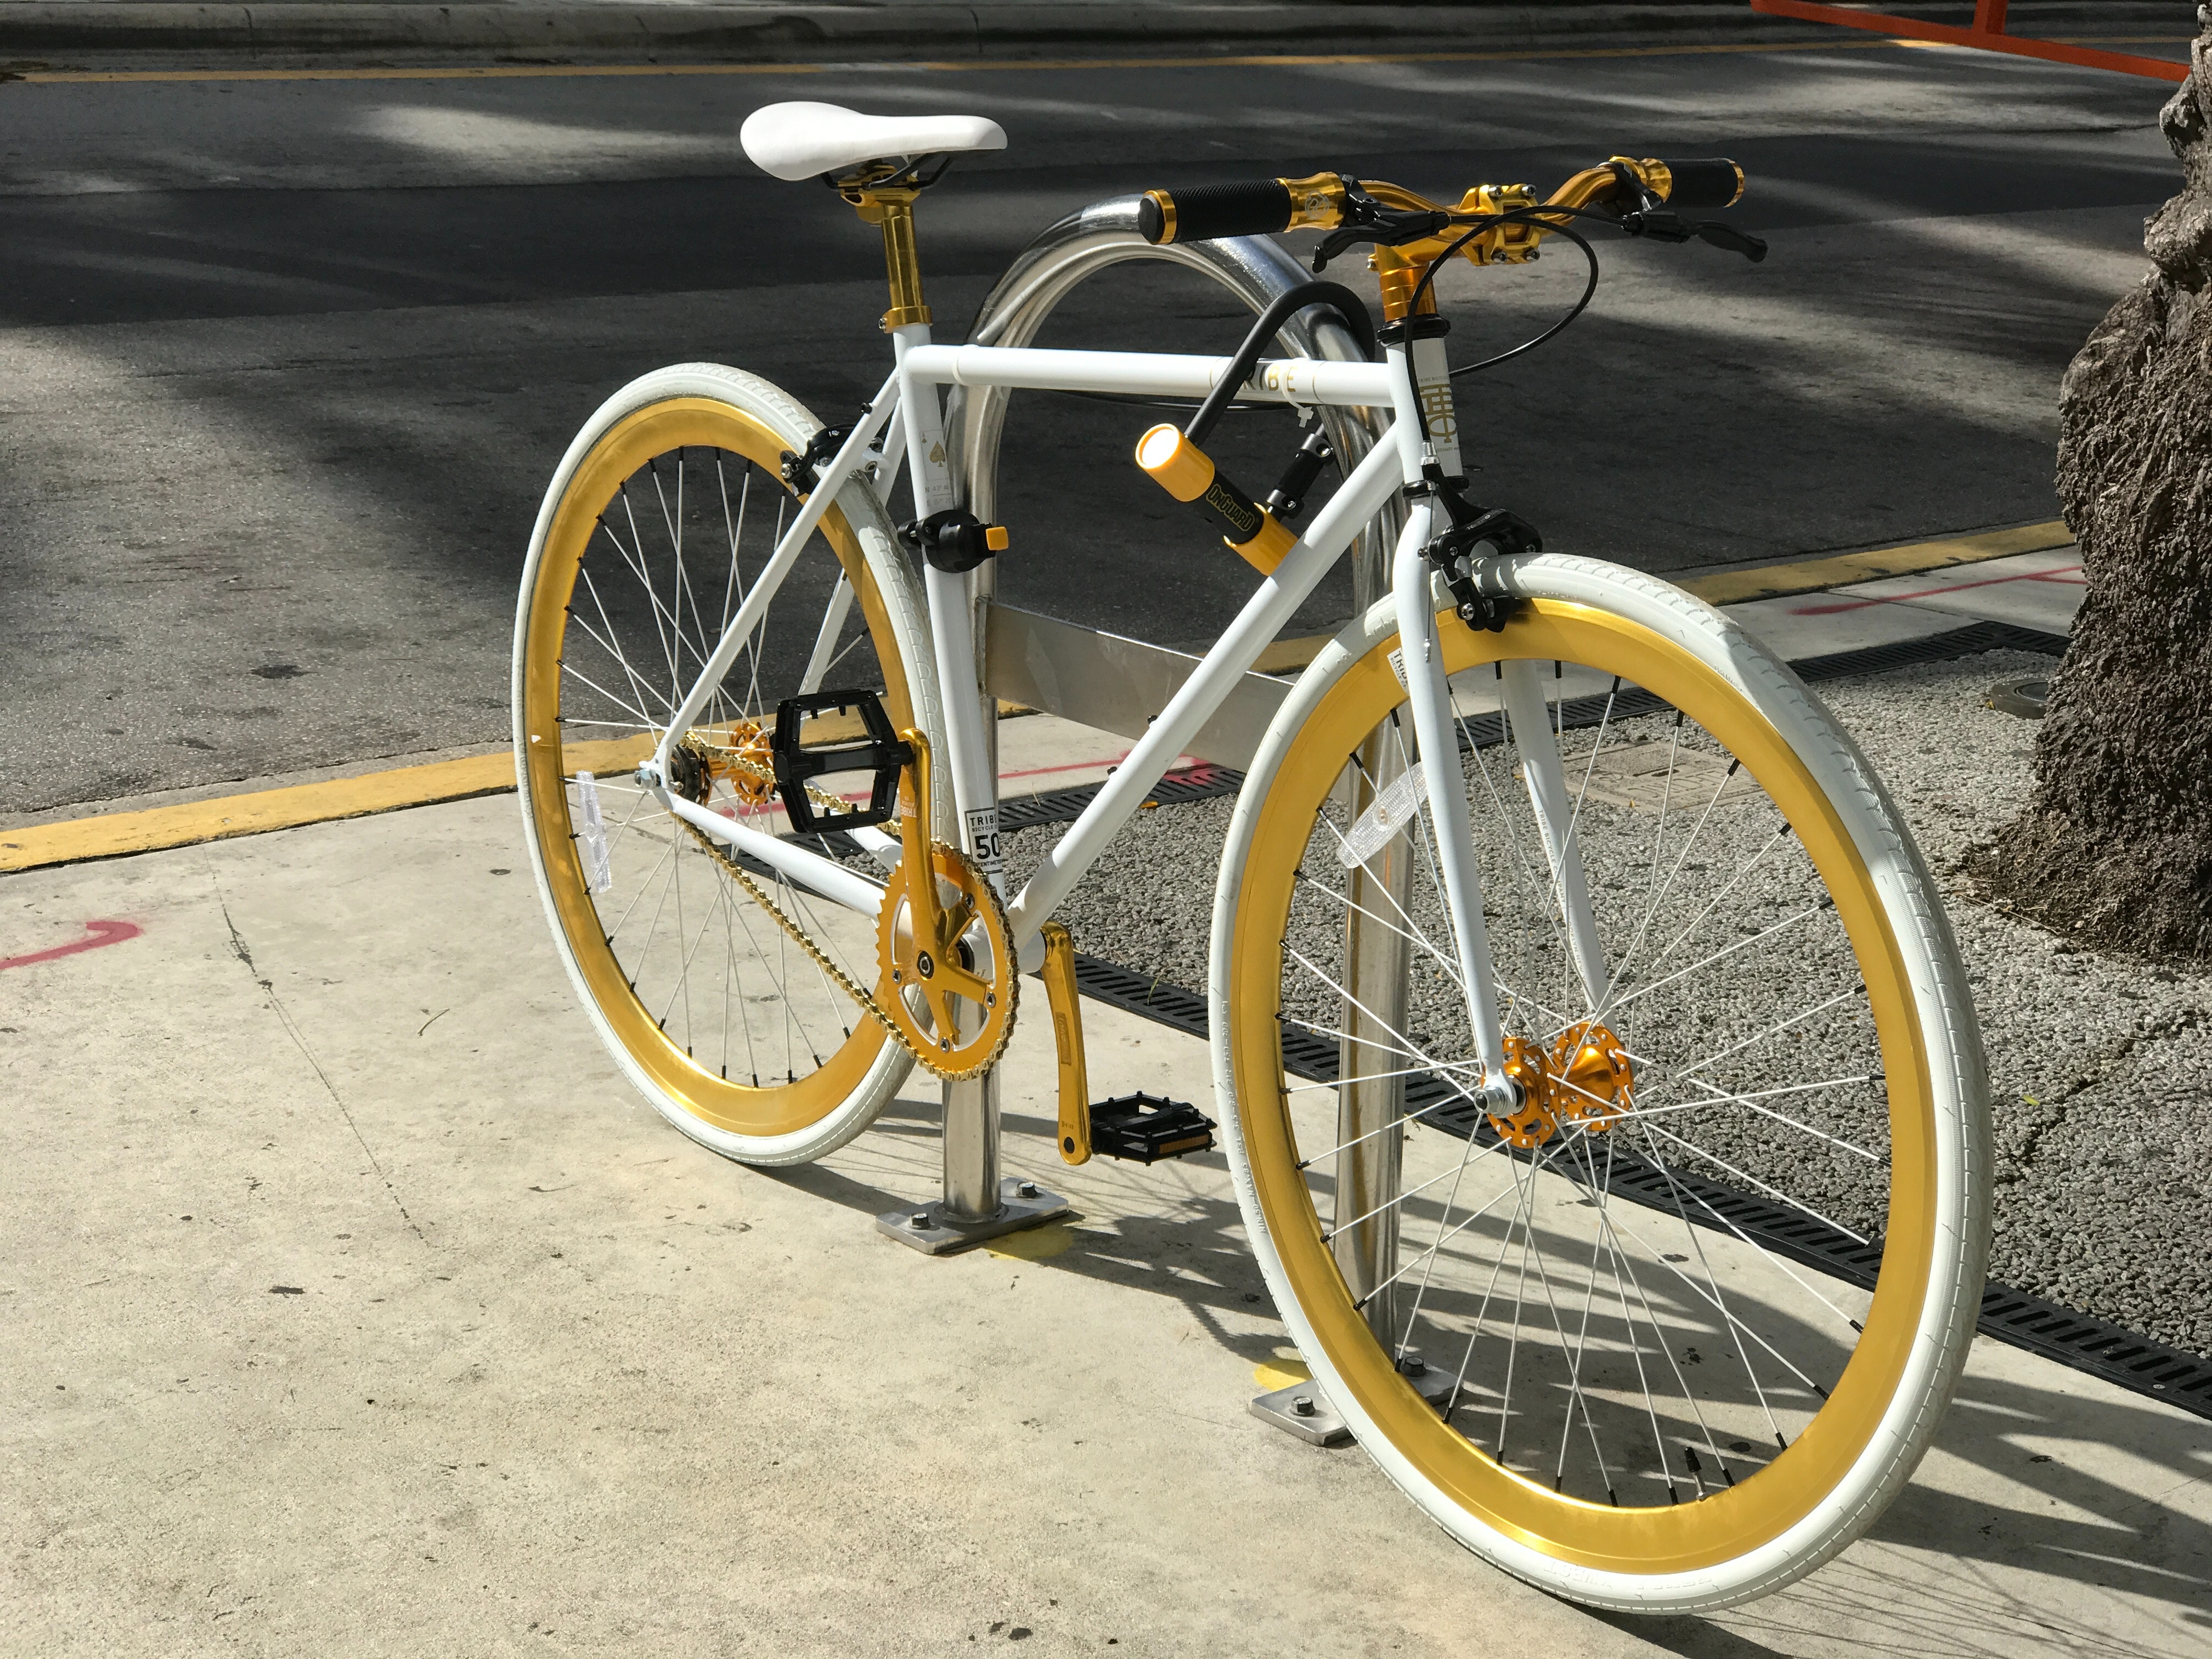 White bicycle chained to a bike rack along a street